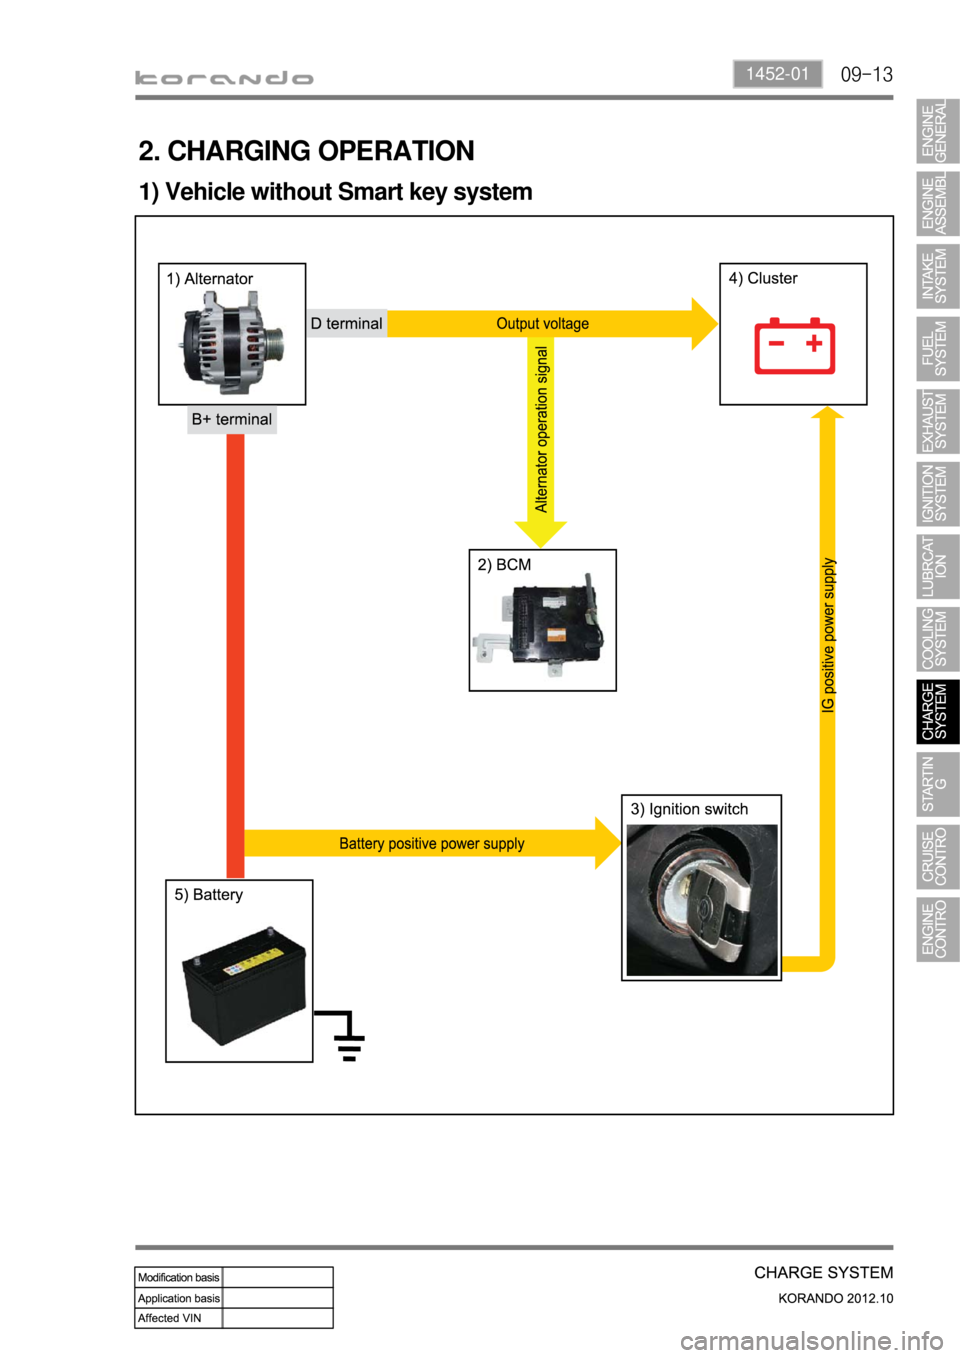 SSANGYONG KORANDO 2012  Service Manual 09-131452-01
2. CHARGING OPERATION
1) Vehicle without Smart key system 